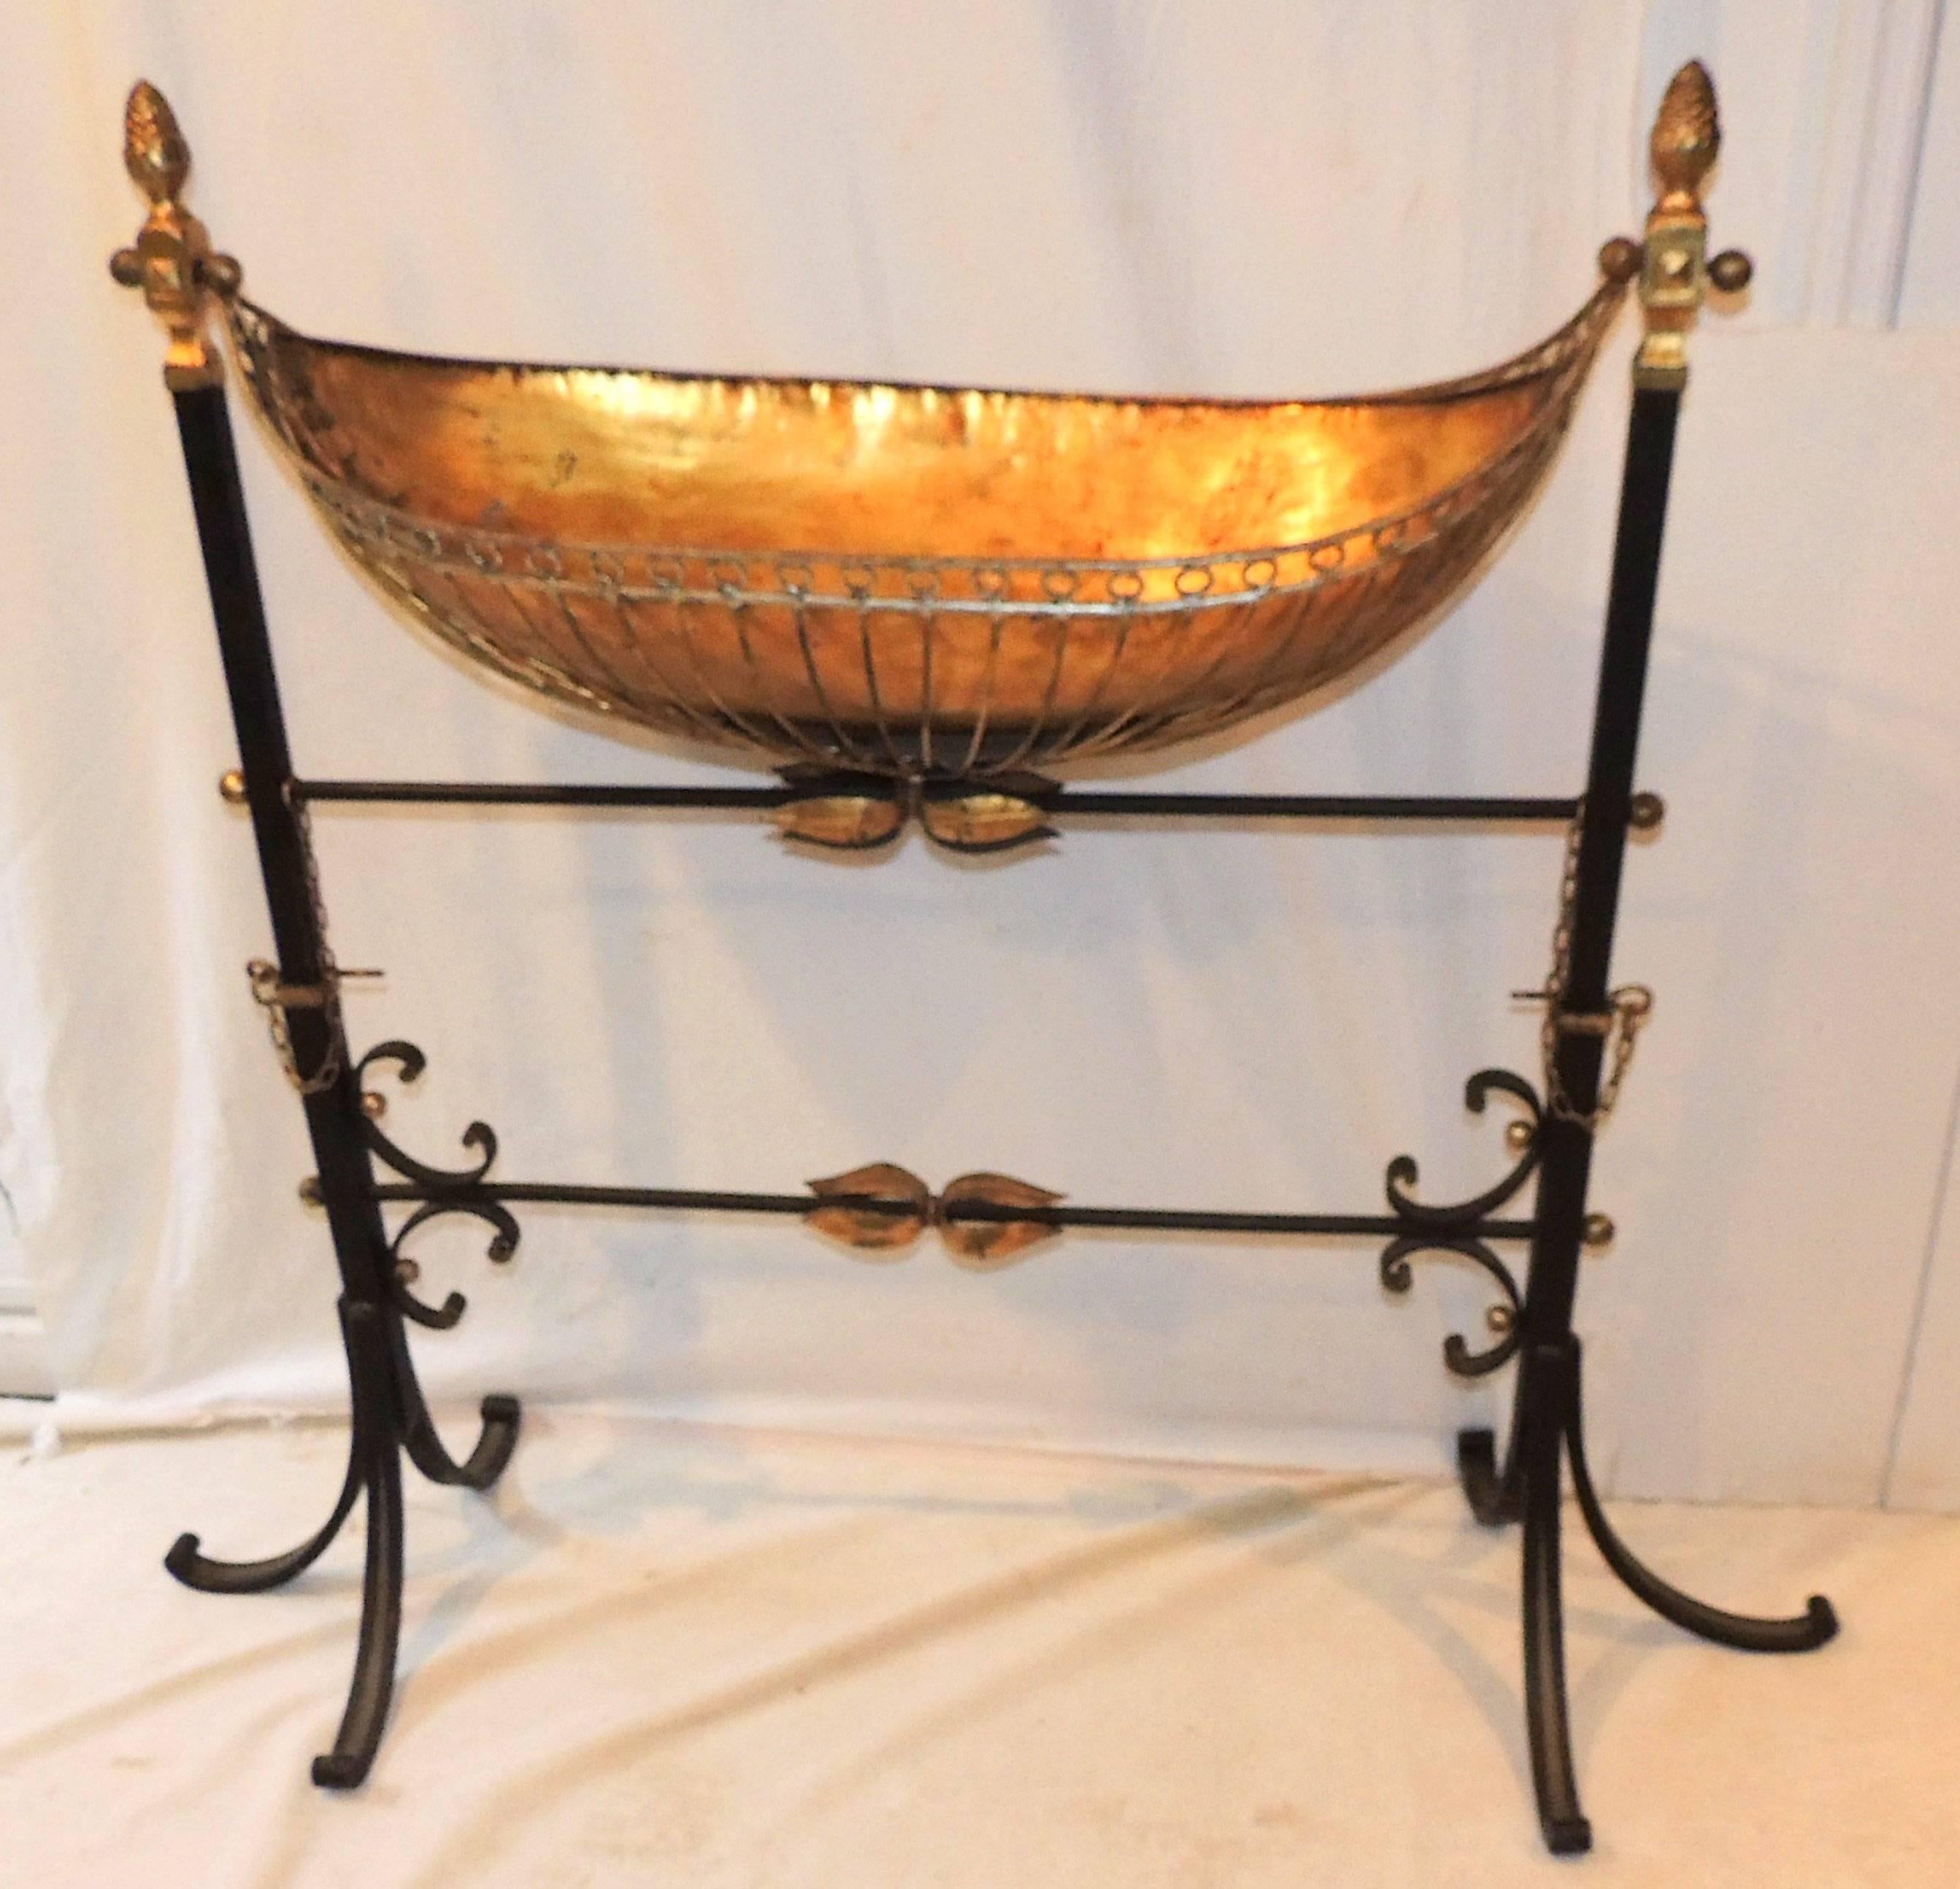 Wonderful French wrought iron copper gilt tole bird bath planter swing stand.
The planter is 14